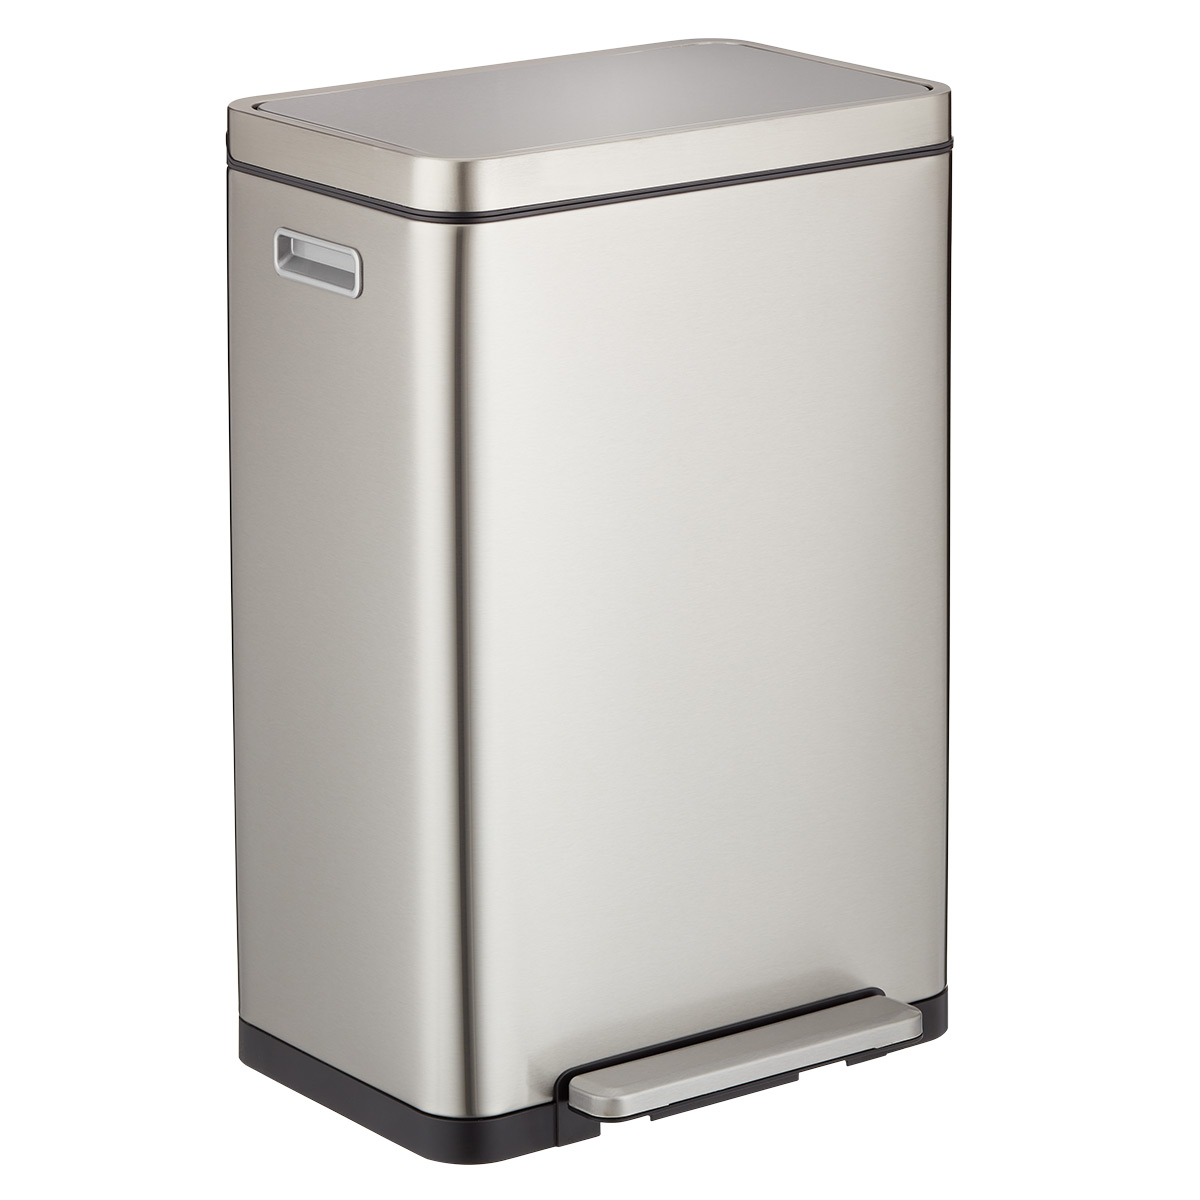 https://www.containerstore.com/catalogimages/477865/10091751-45-liter-12-gallon-stainles.jpg